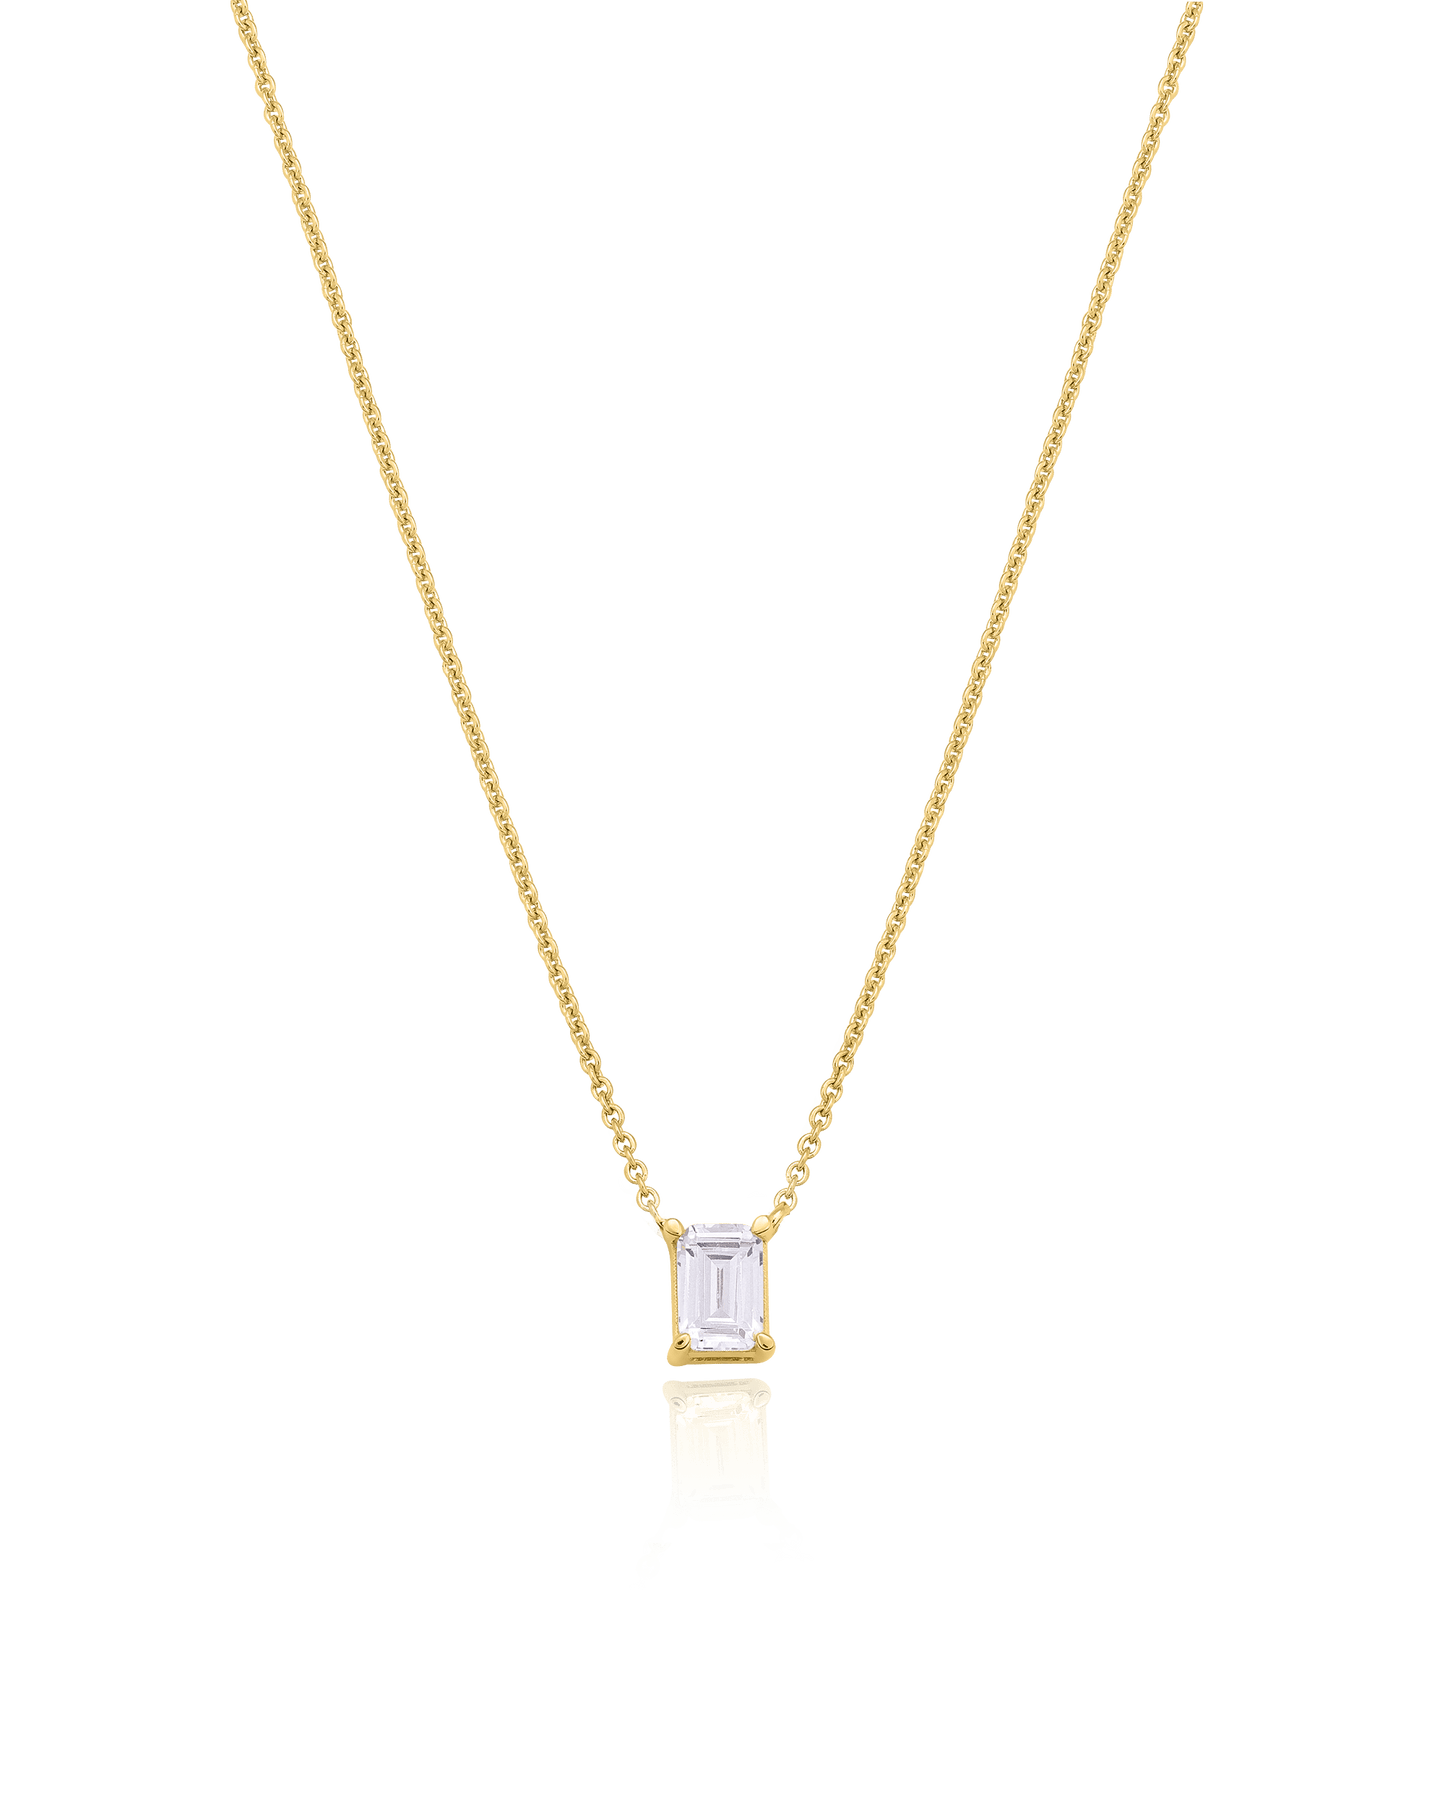 Emerald Solitaire Diamond Necklace - 14K Rose Gold Necklaces magal-dev 